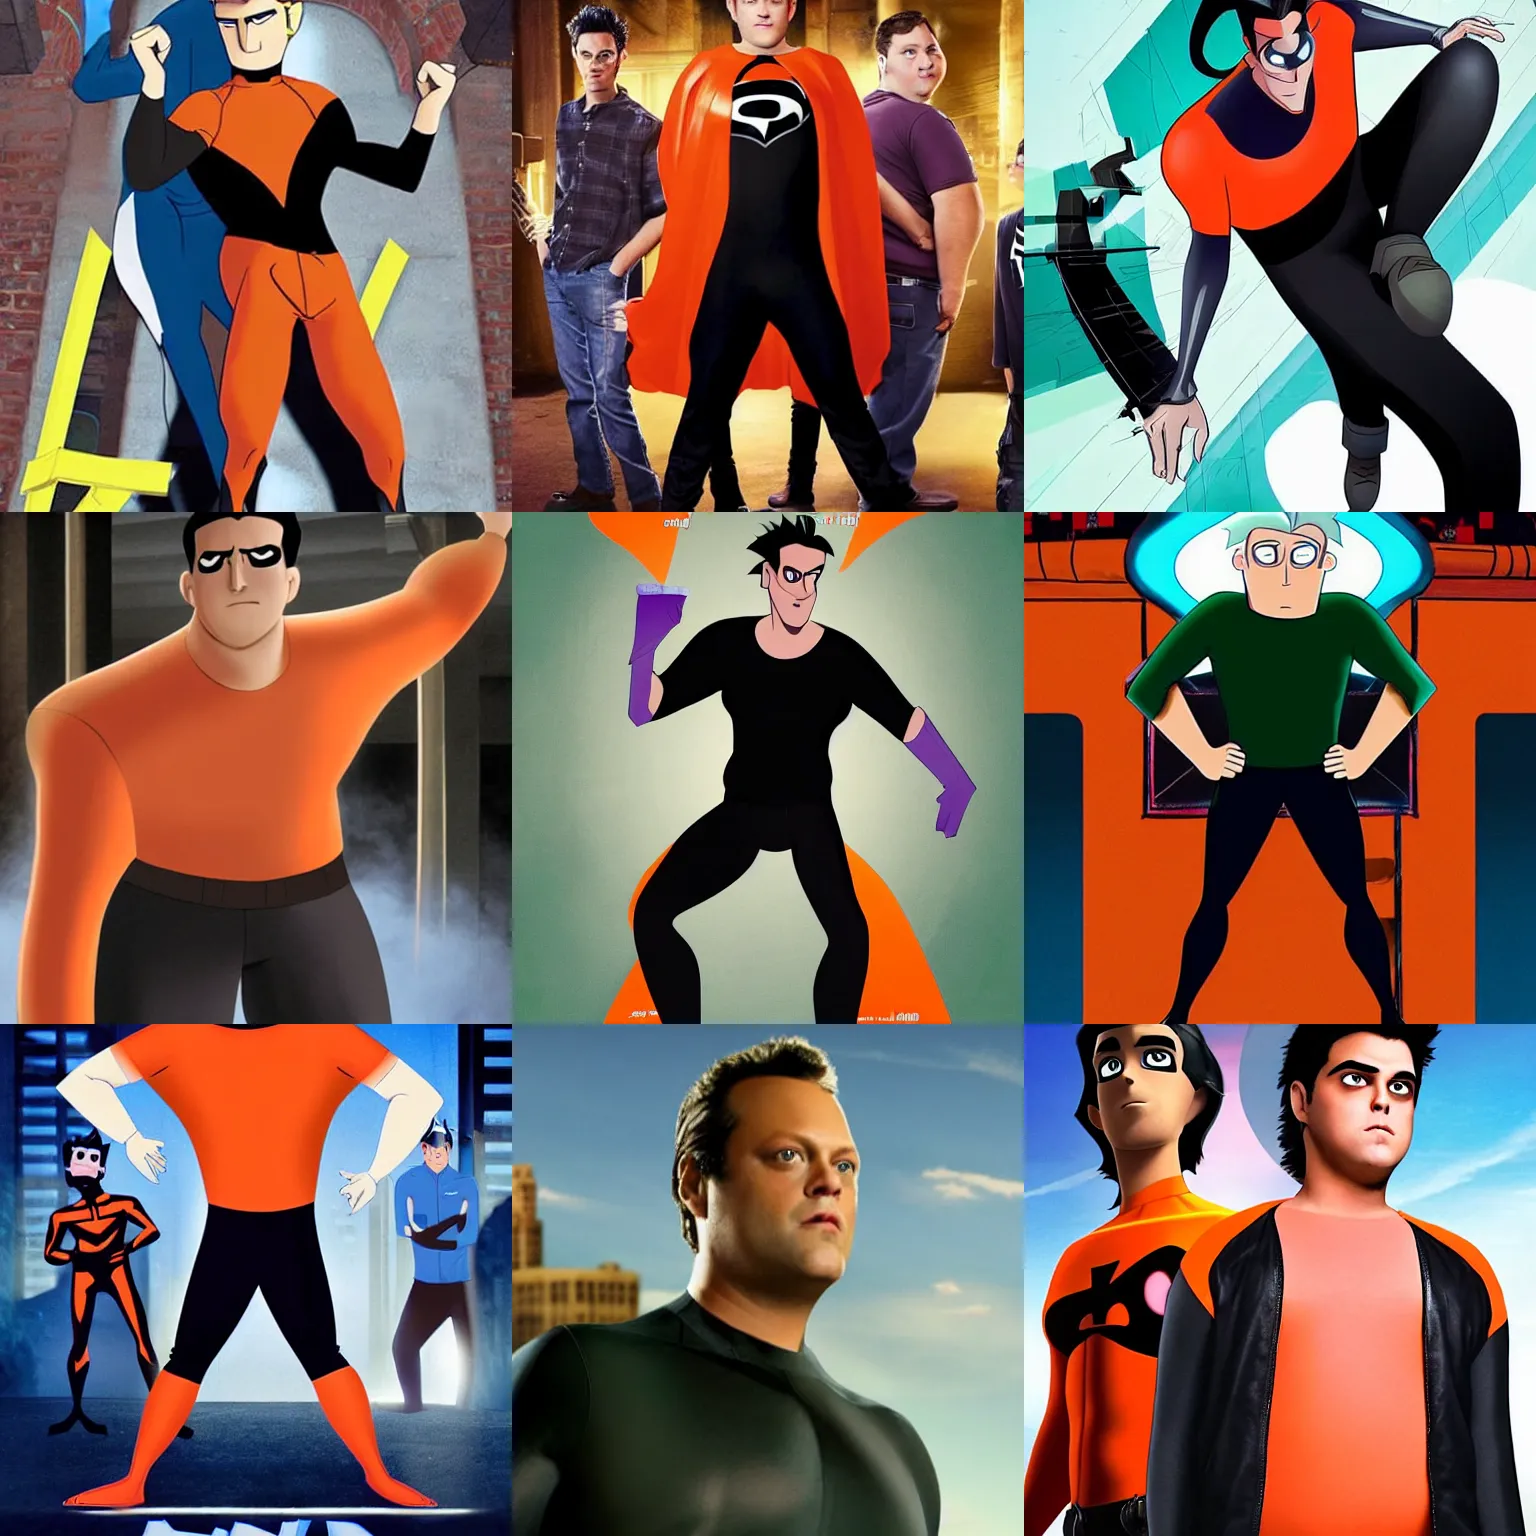 Prompt: a cinematic poster of vince vaughn as supporting character jack fenton from the live - action netflix superhero series'danny phantom'; fat ; loose - fitting orange bodysuit with black neck ; digital photograph